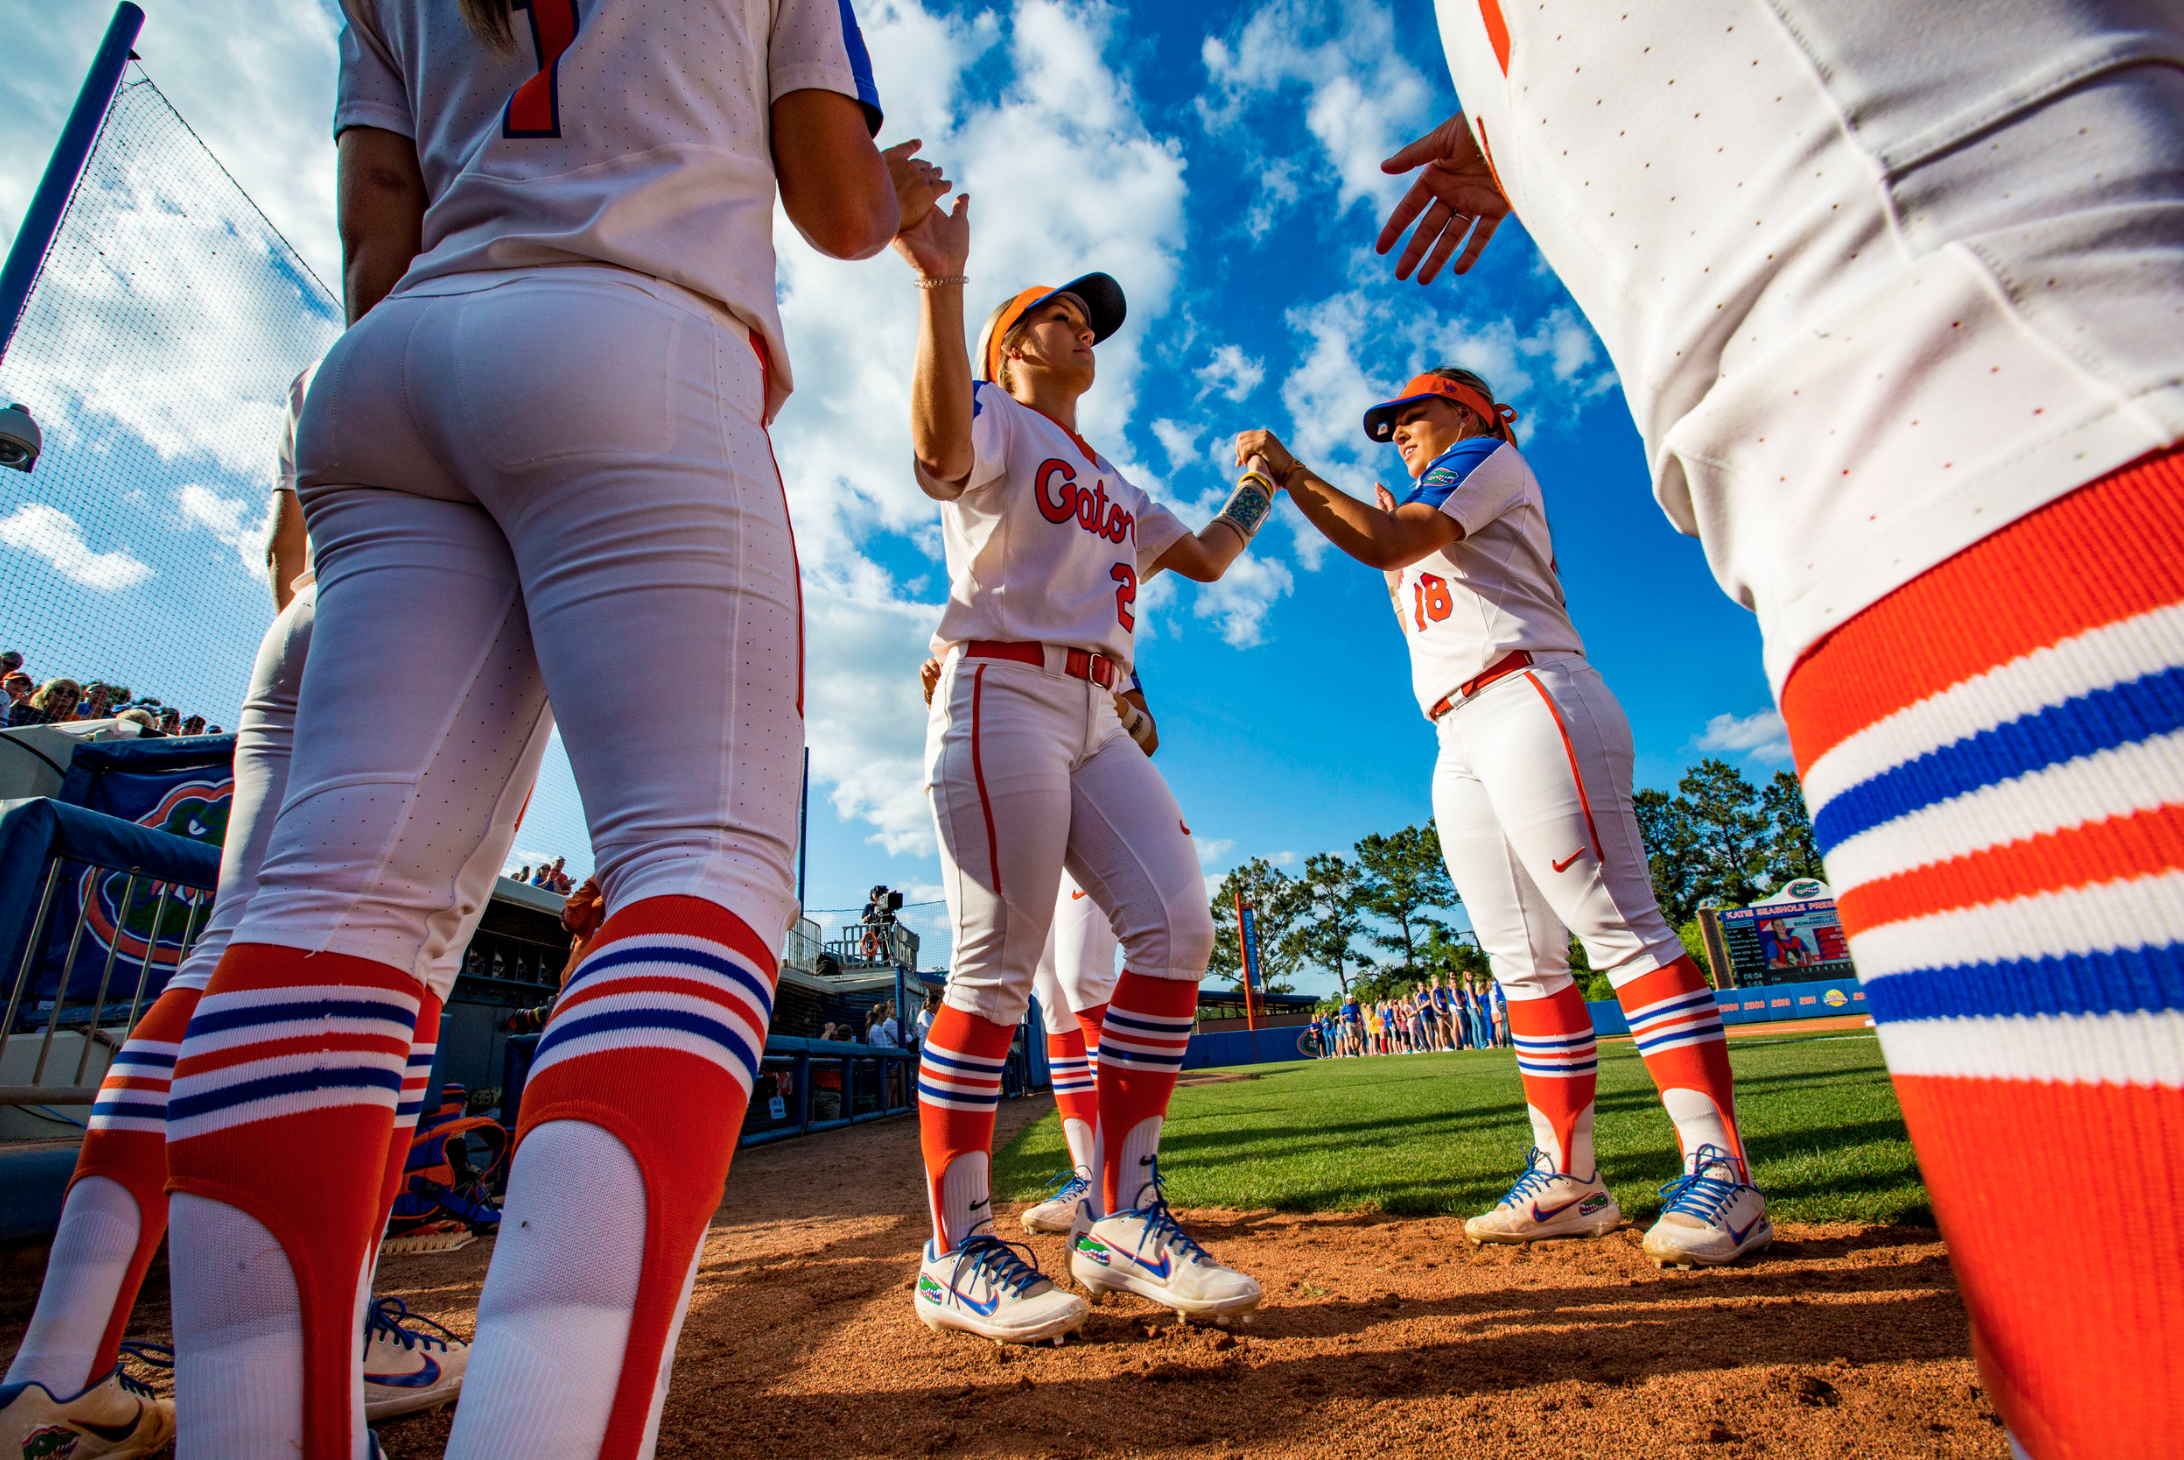  The Florida Gators' starting lineup is announced before the start of their home game against the Florida State Seminoles on April 25, 2018. The Florida Gators beat FSU 5-1. 